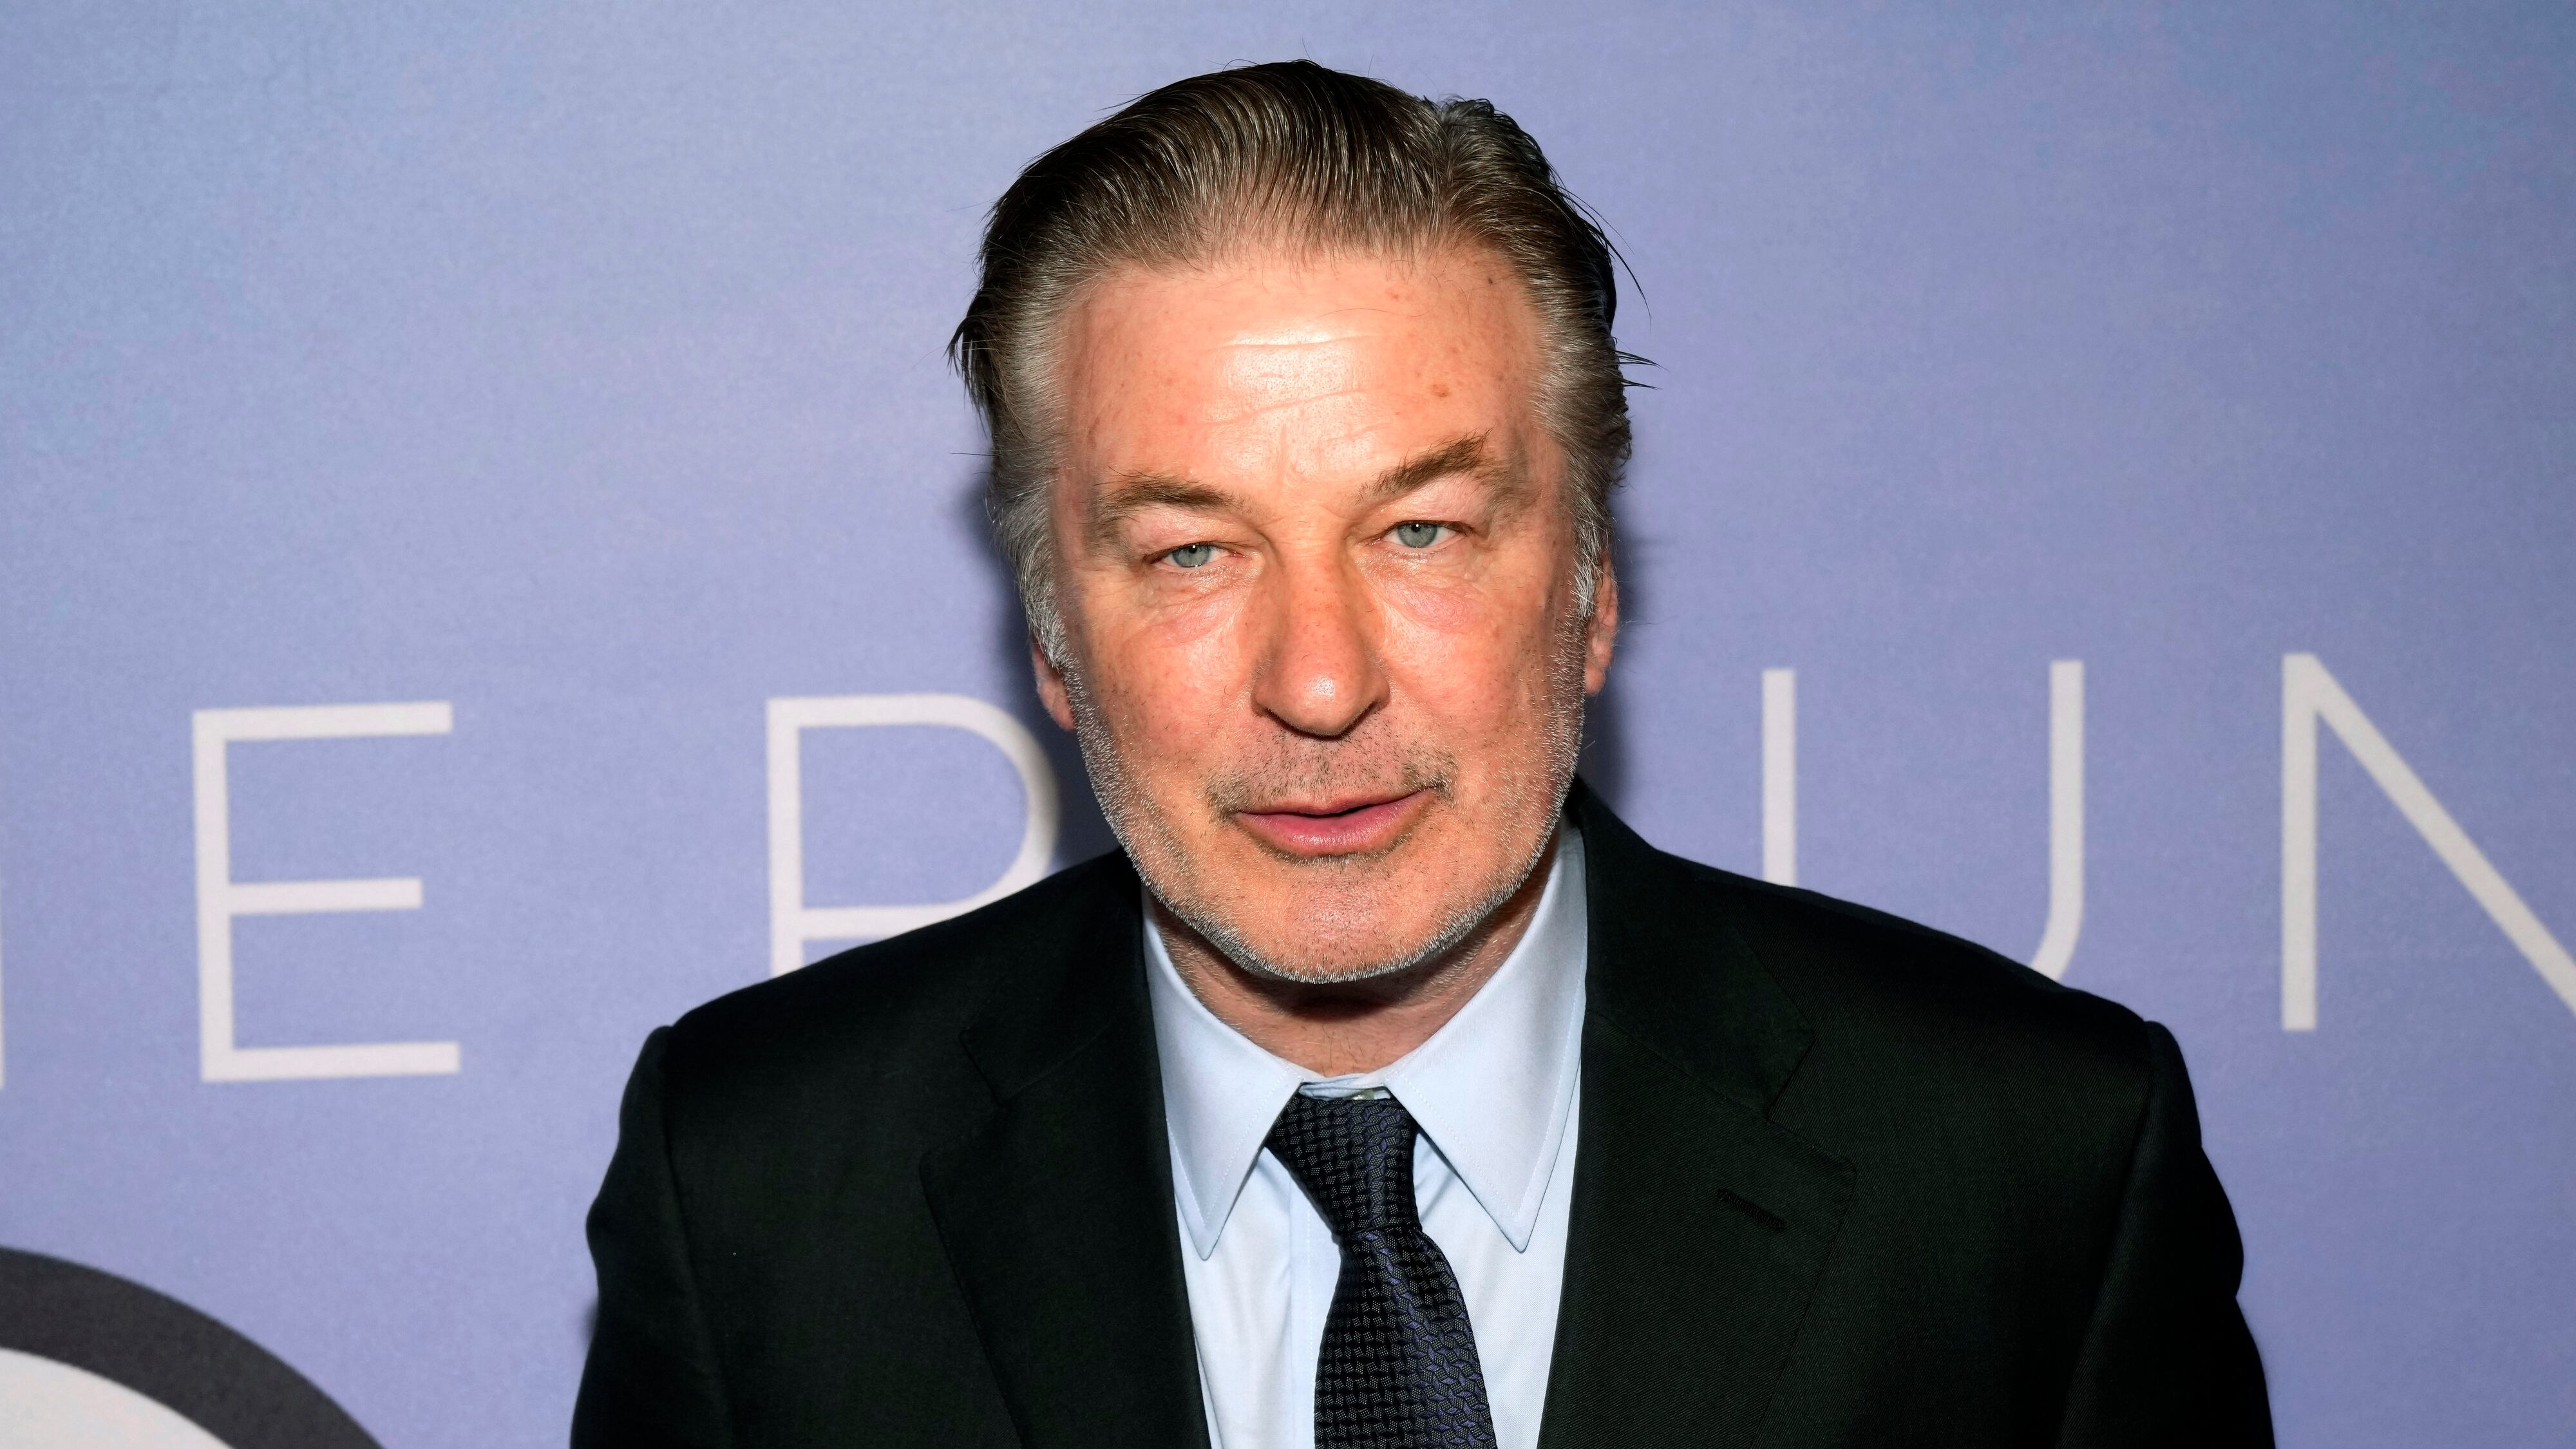 ‘We look forward to our day in court’, says Alec Baldwin’s lawyers (Charles Sykes/Invision/AP)